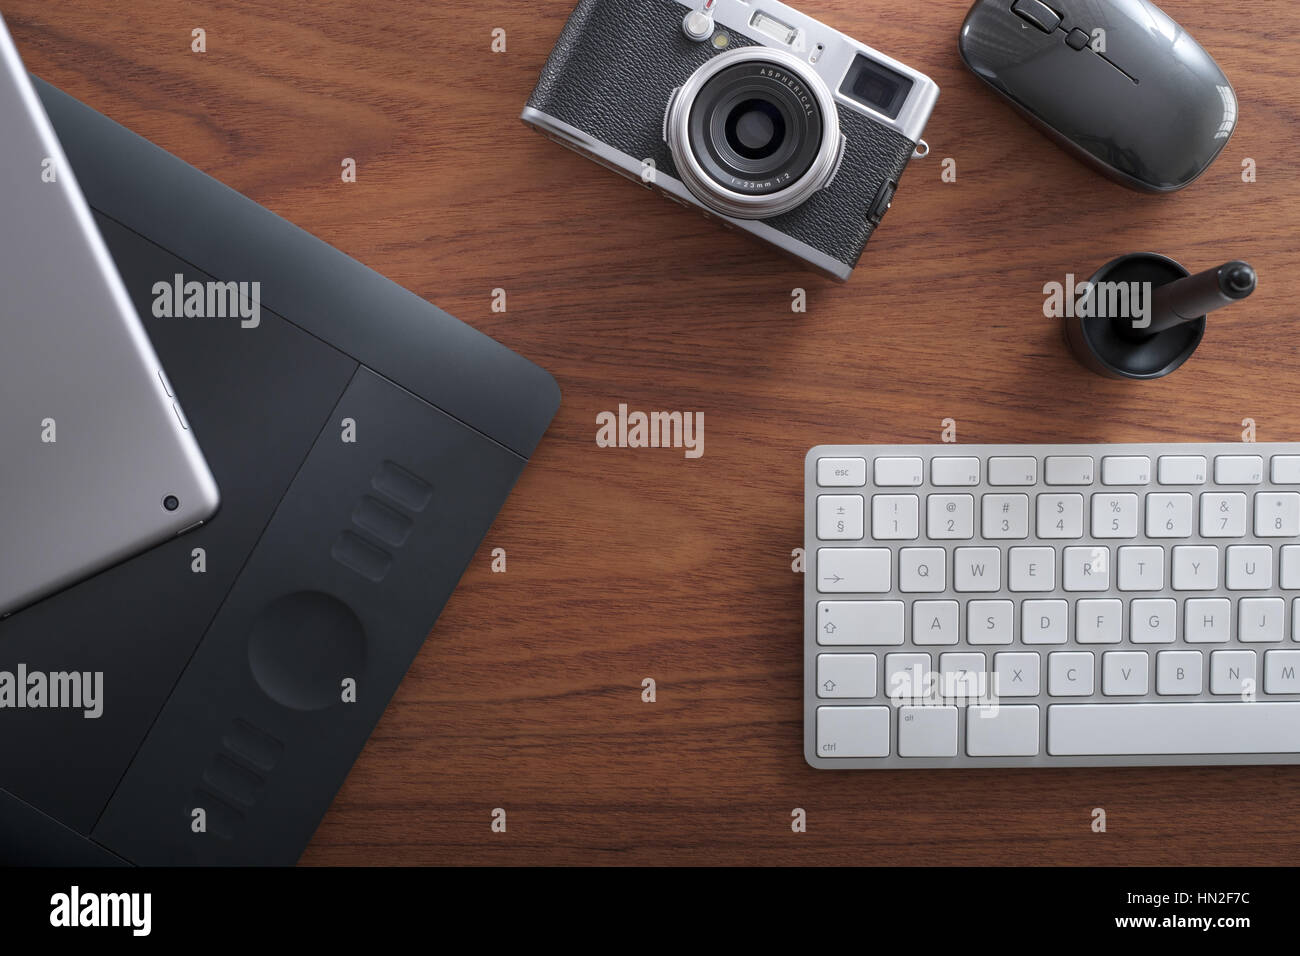 Office desk with camera, digital pad, graphic tablet, wireless mouse and keyboard Stock Photo